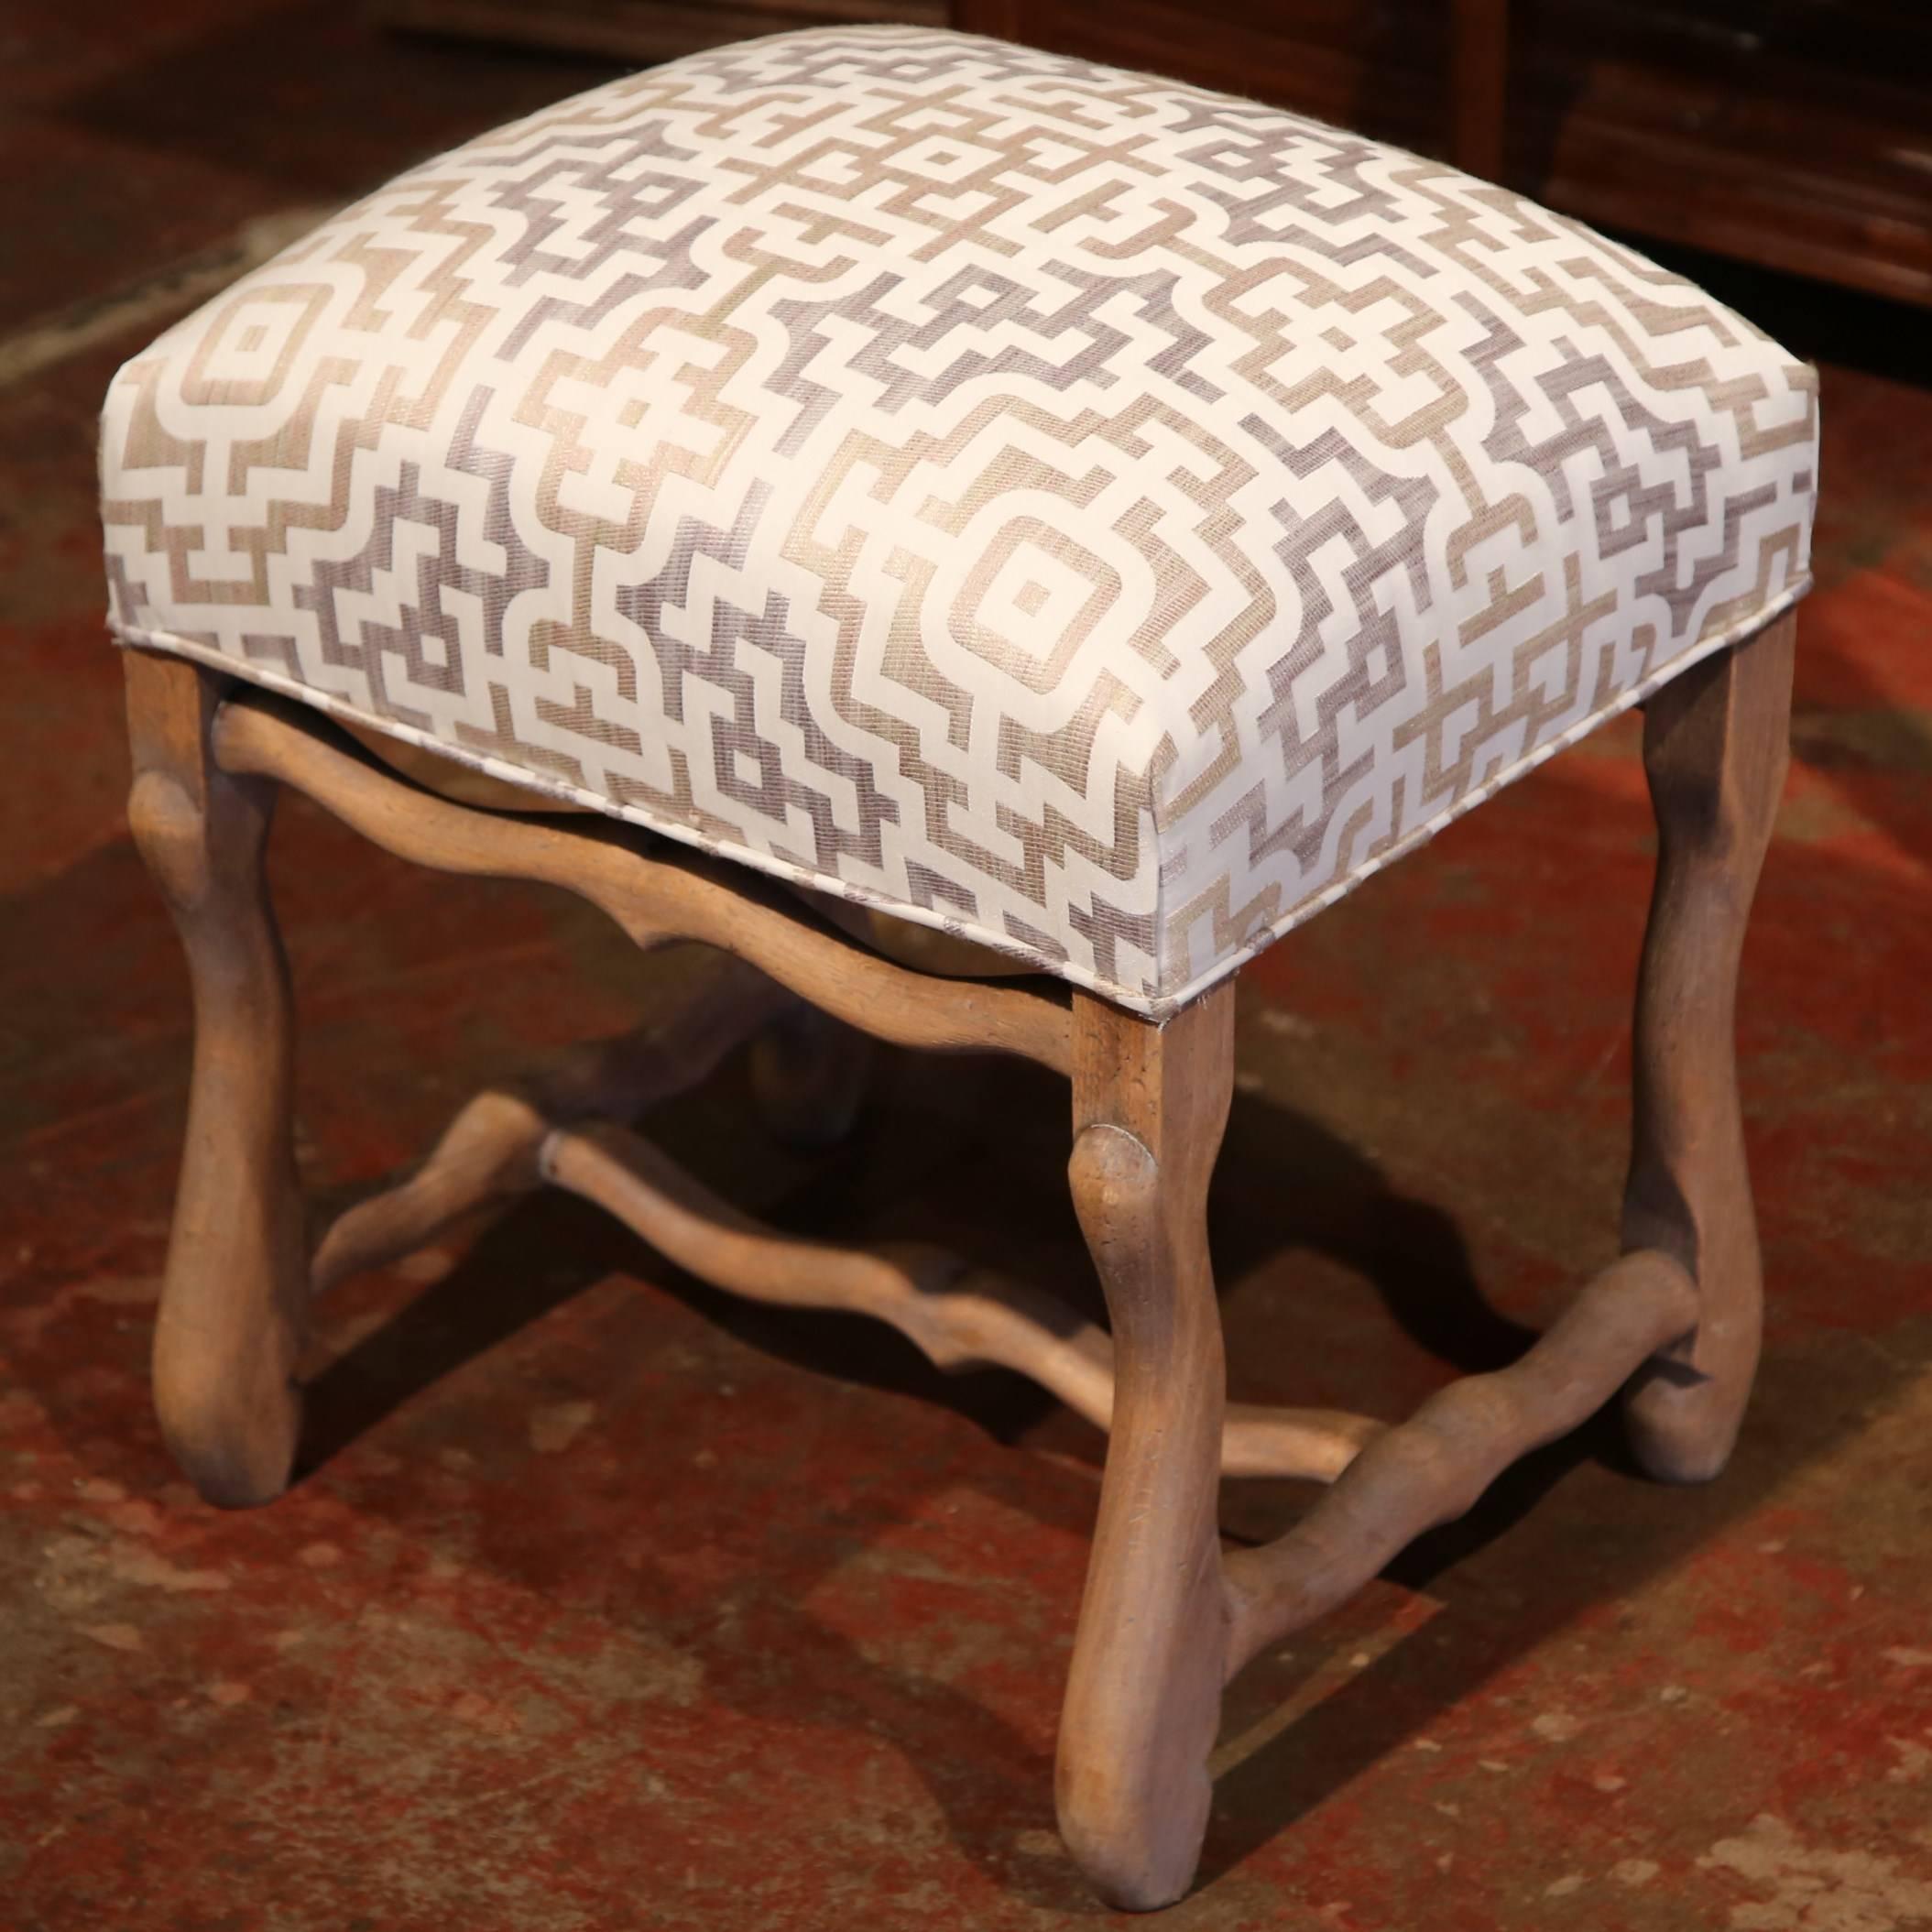 Add extra seating to your living room with this elegant set of 4 beech wood "os de mouton" stools. Crafted in France circa 1880, each stool seat is almost square and has been reupholstered with fresh new fabric and padding. All the pieces